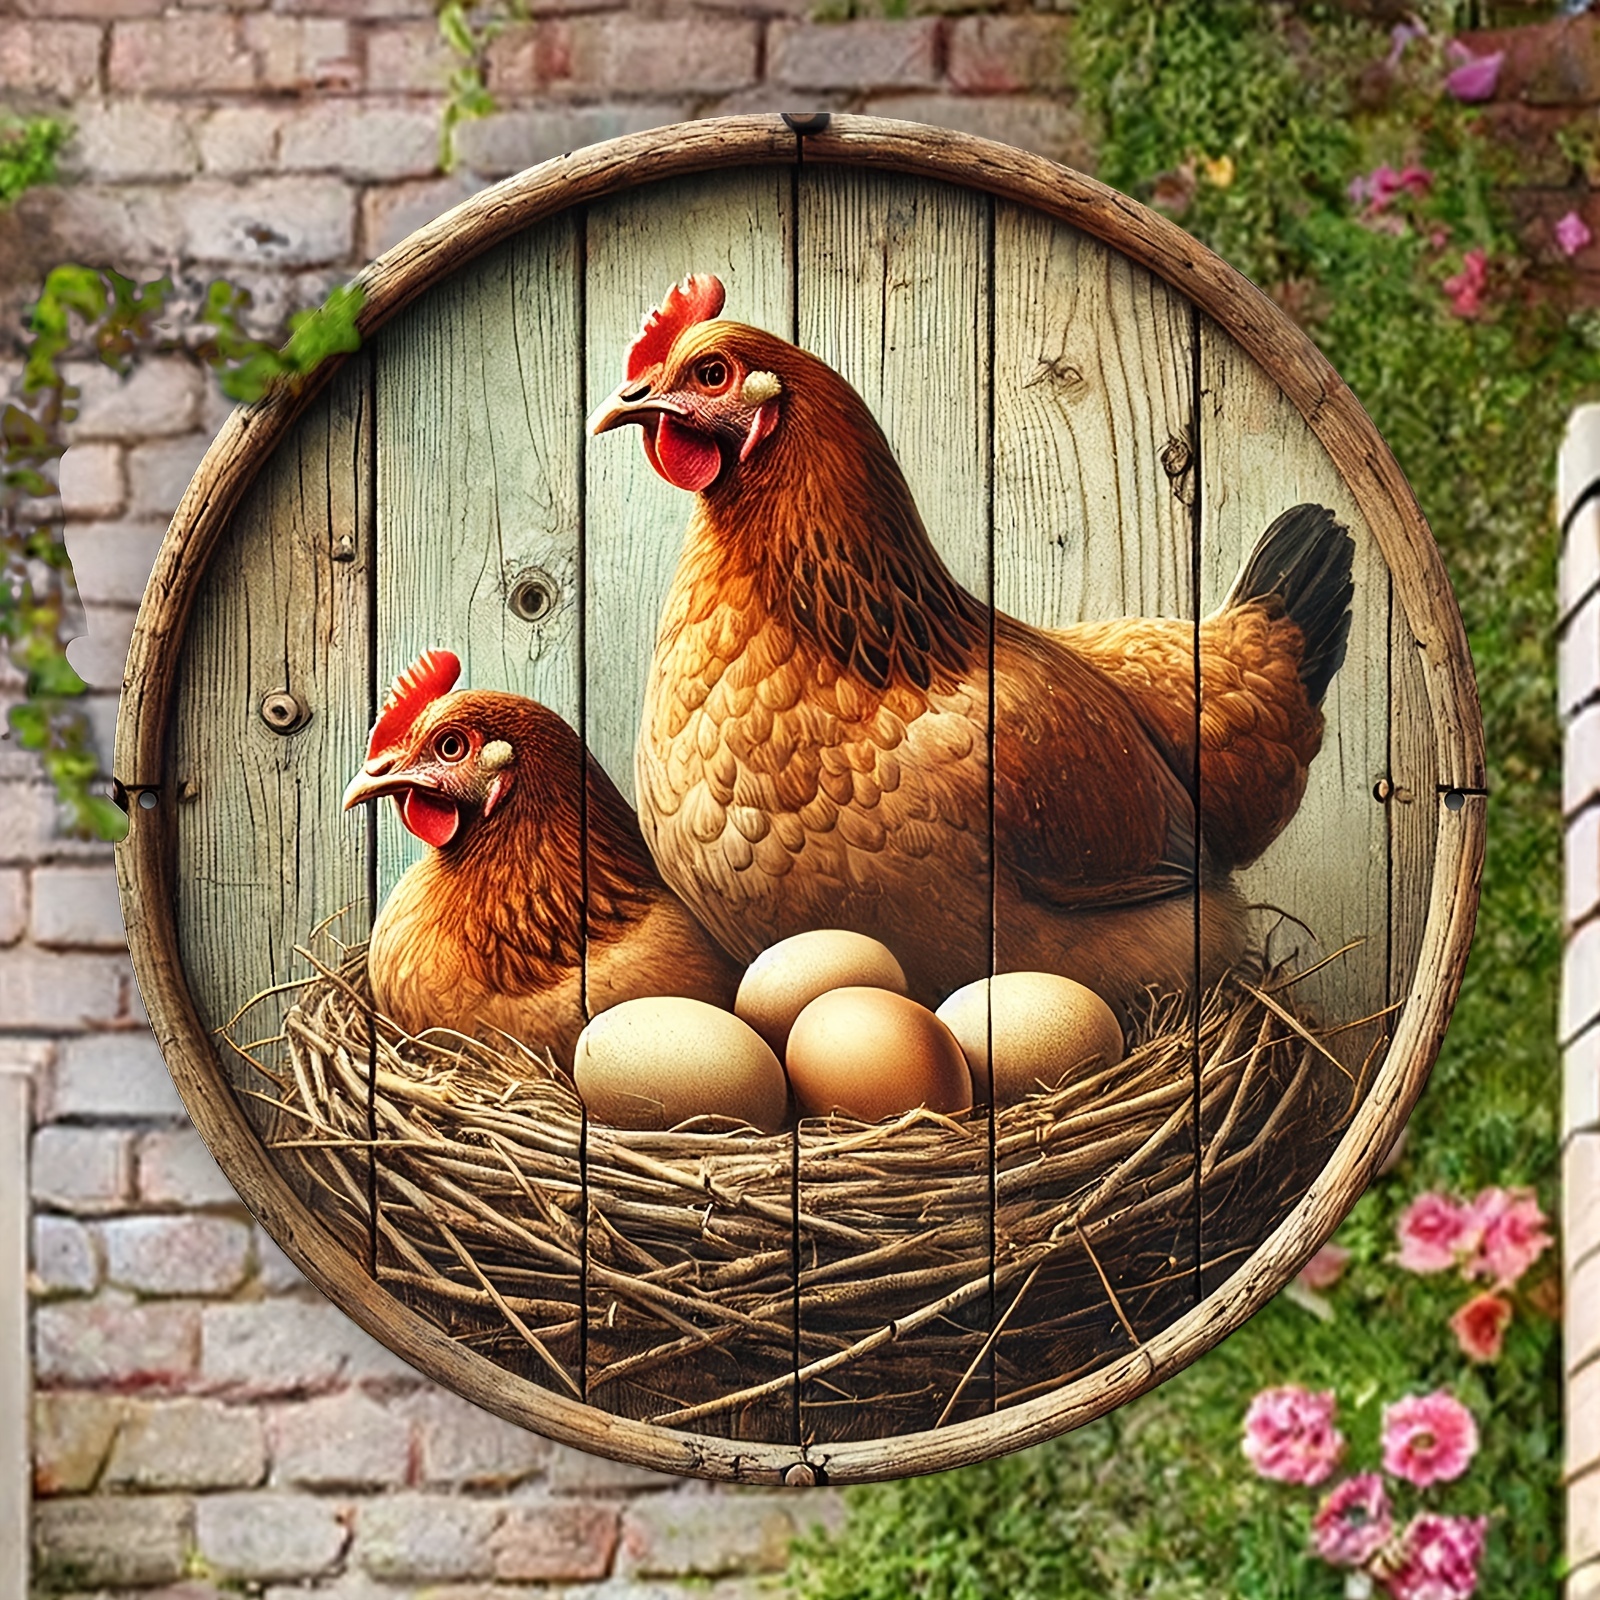 

Aluminum Chicken Coop & Hen With Eggs Vintage Round Wall Sign Decor - 8x8 Inch, Waterproof, Weatherproof, Set Of 1, For Home, Apartment, Shop, Chicken Coop Decorations